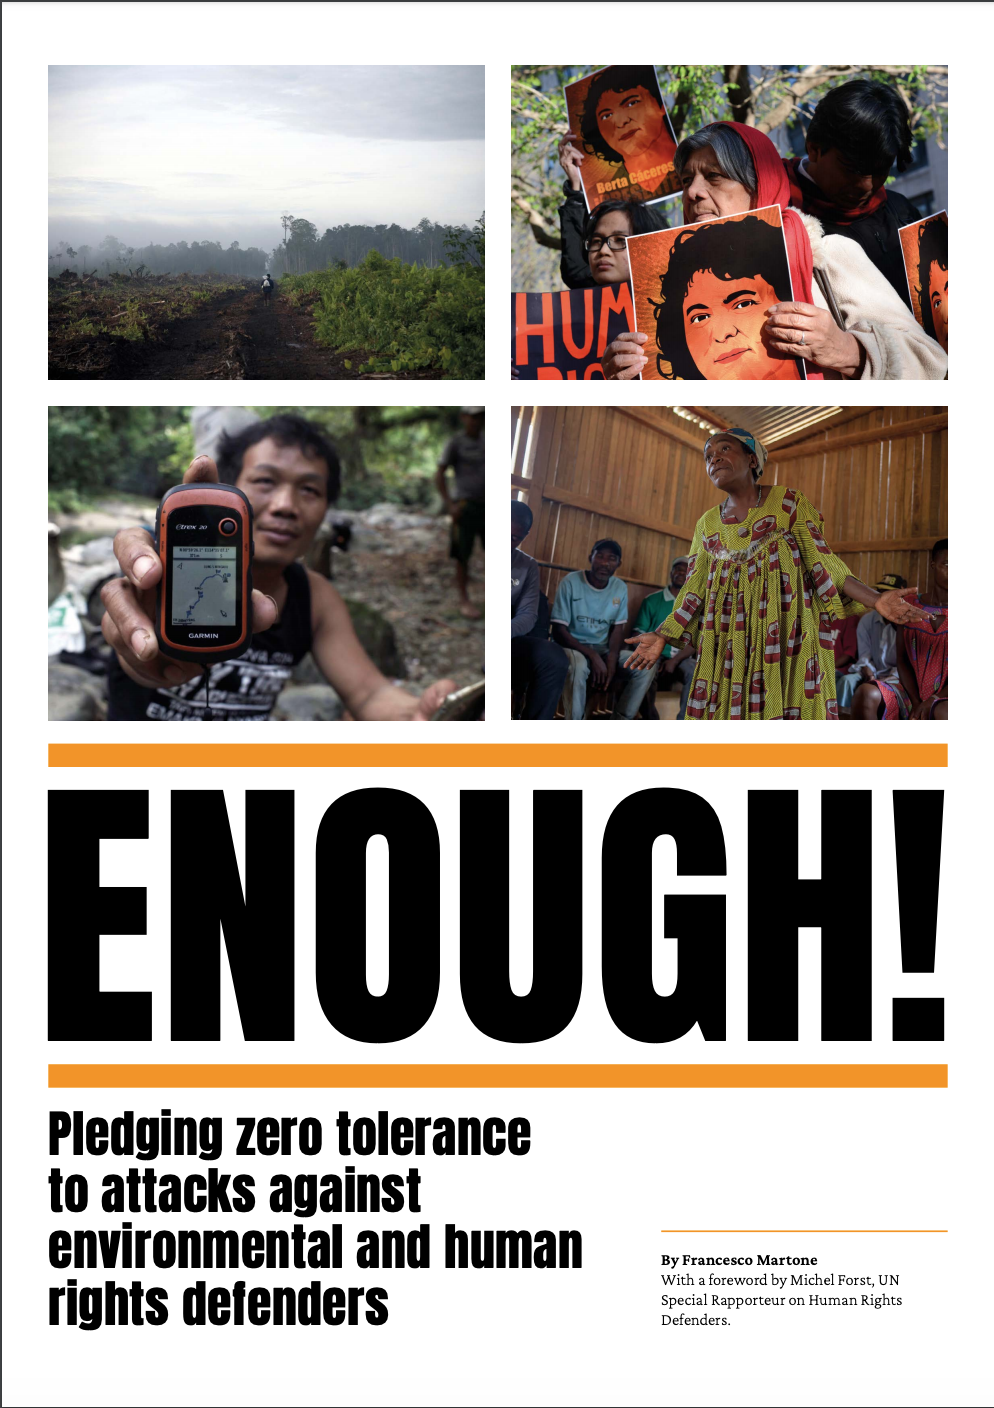 Enough! Pledging zero tolerance to attacks against environmental and human rights defenders